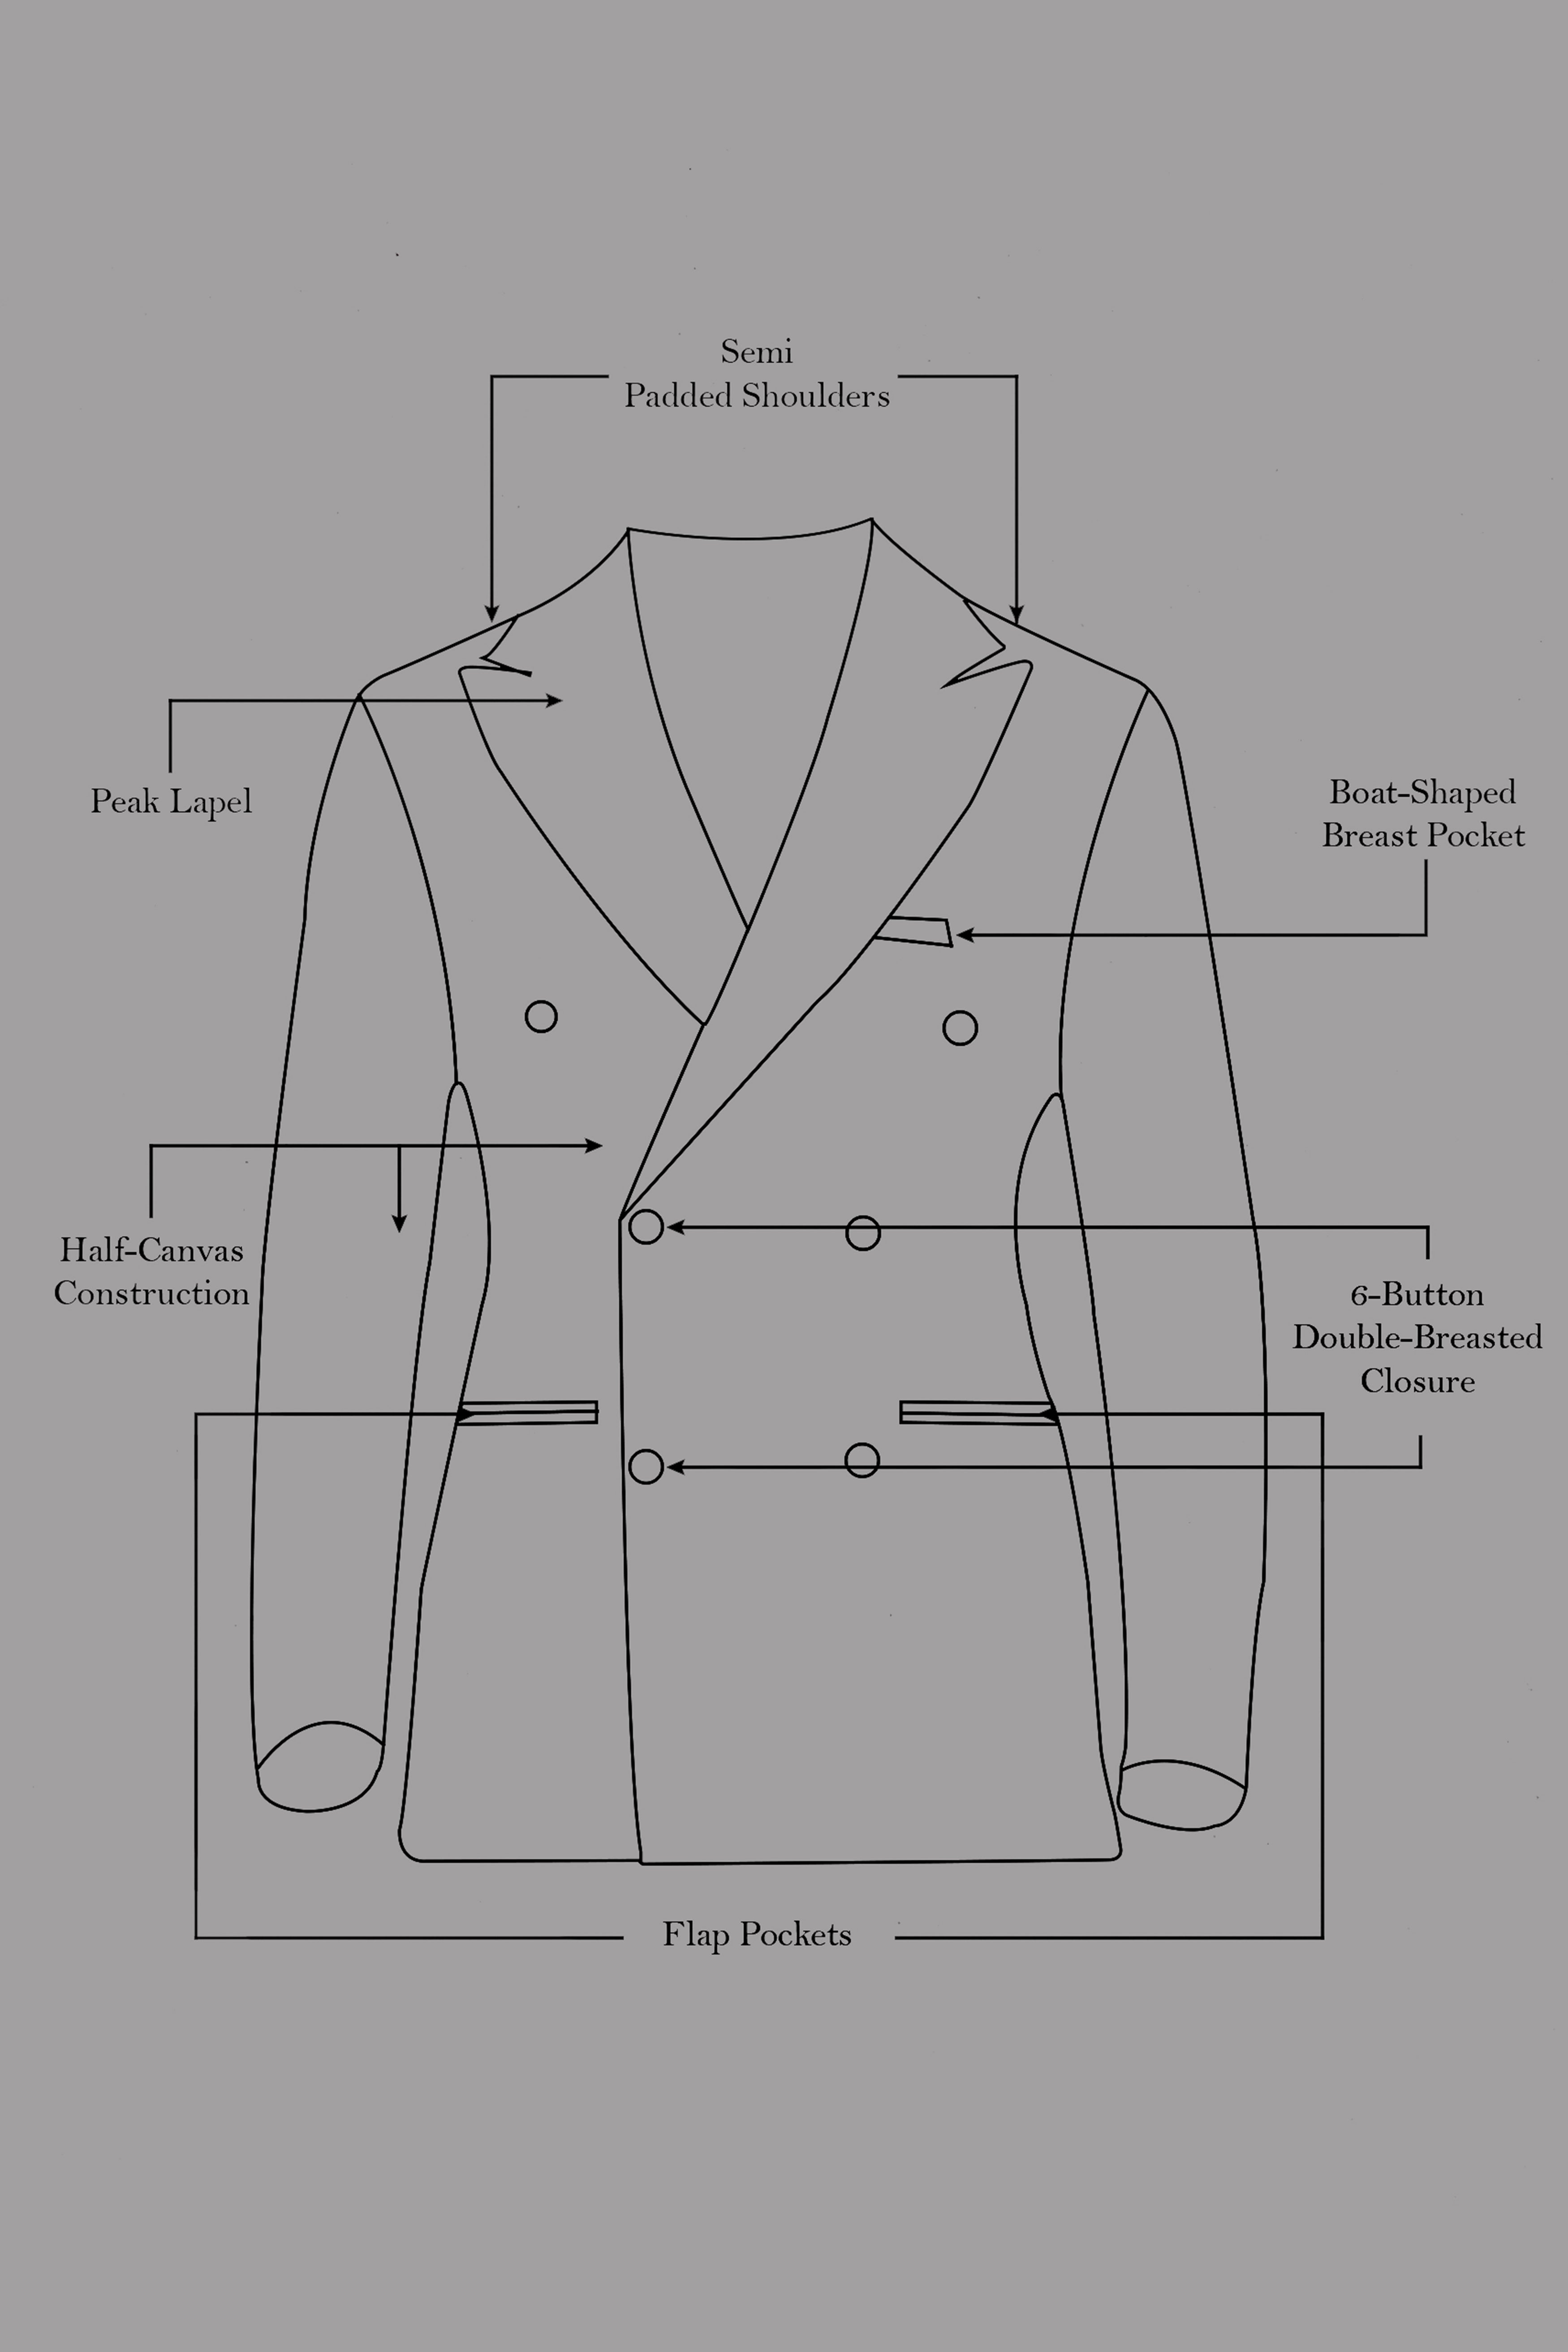 Ironside Gray Stretchable Double Breasted Premium Cotton traveler Blazer